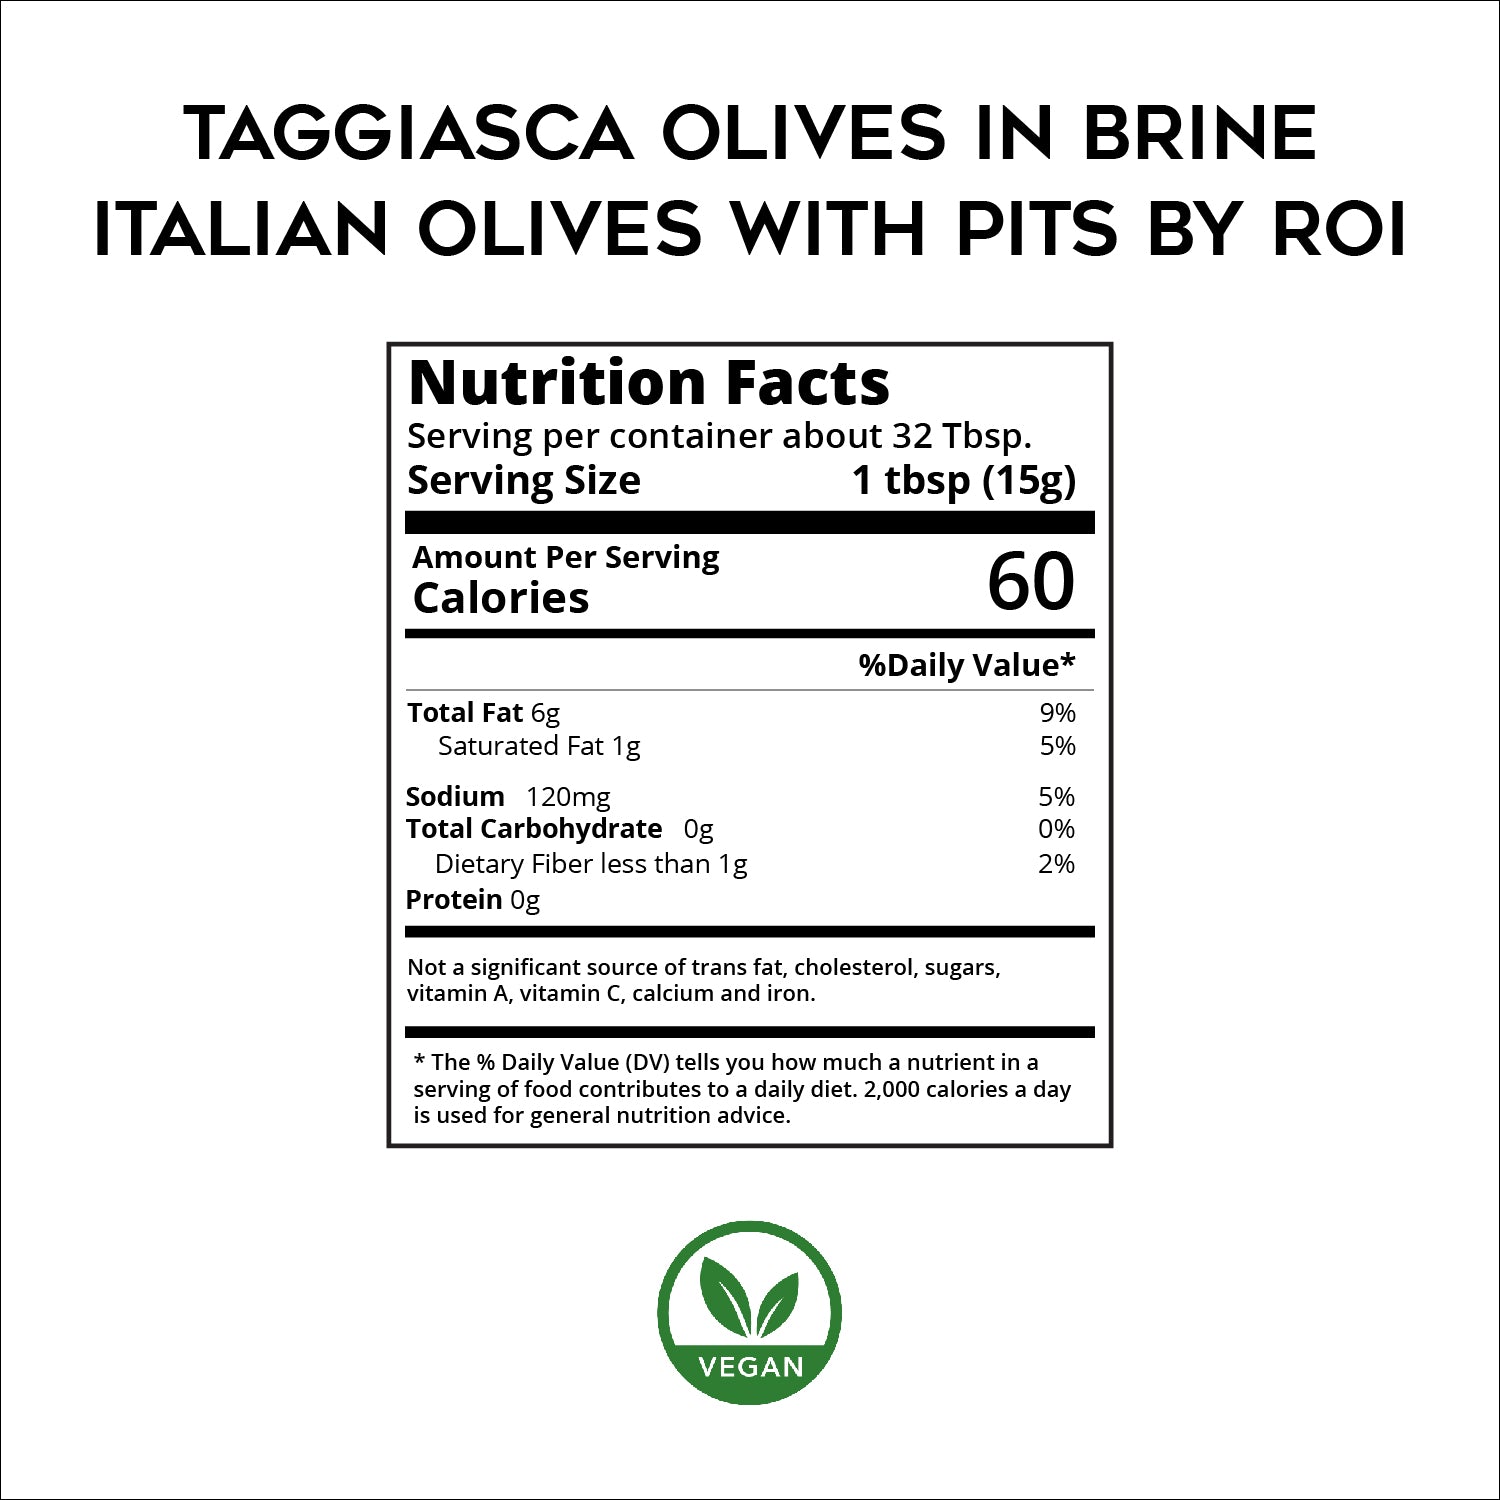 Taggiasca Olives in Brine - Italian Olives with Pits by ROI